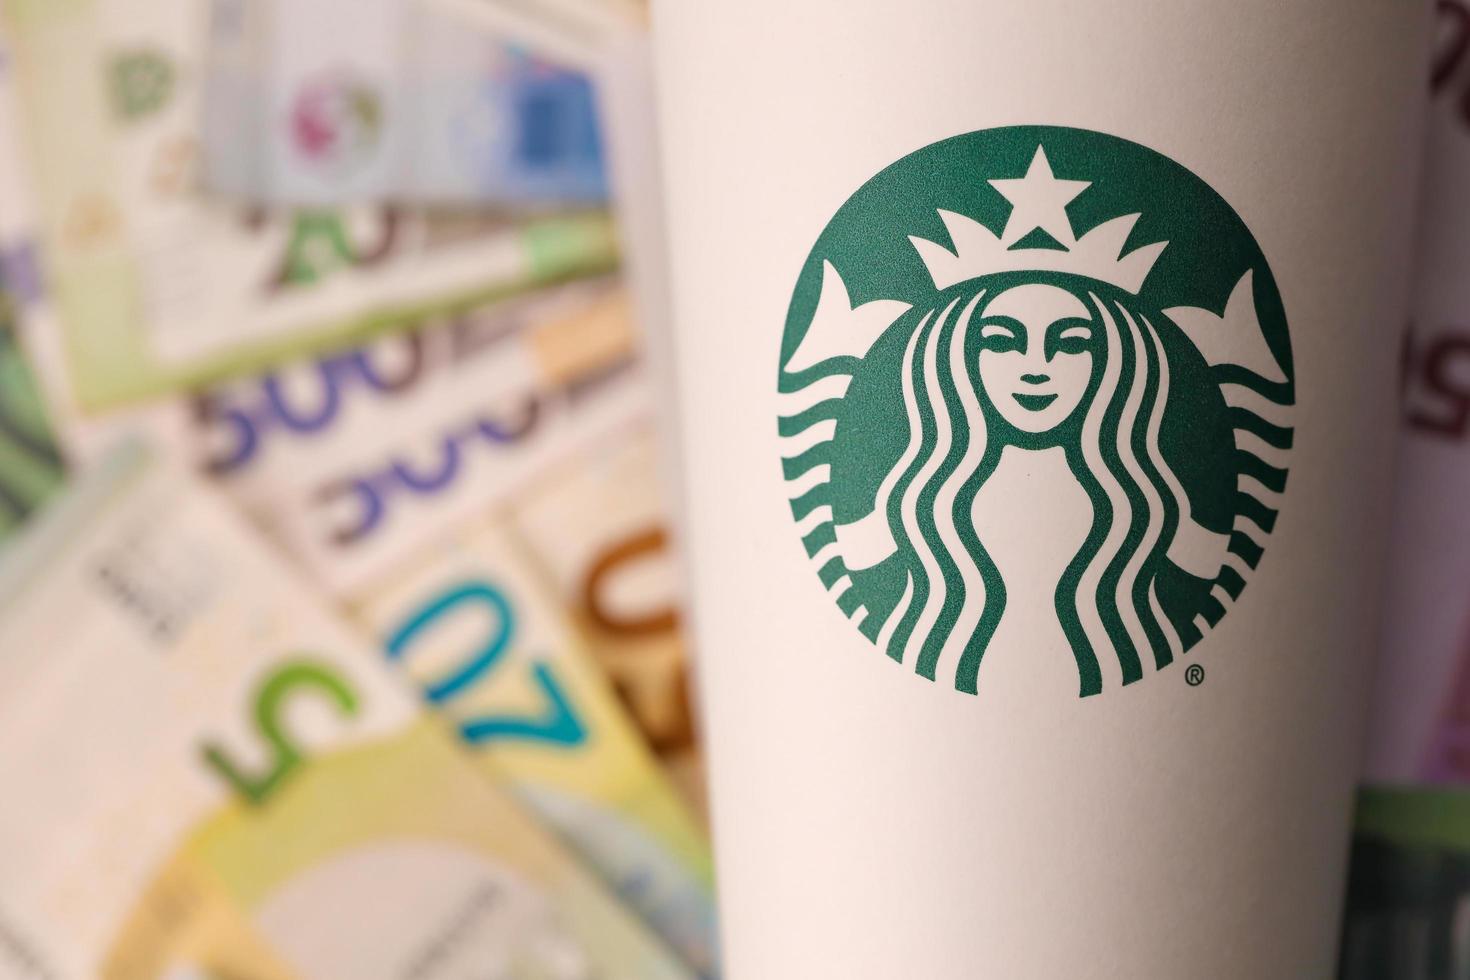 https://static.vecteezy.com/system/resources/previews/012/887/011/non_2x/kharkiv-ukraine-december-16-2021-white-paper-cup-with-starbucks-logo-and-money-bills-starbucks-is-the-world-s-largest-coffee-house-with-over-20-000-stores-free-photo.JPG